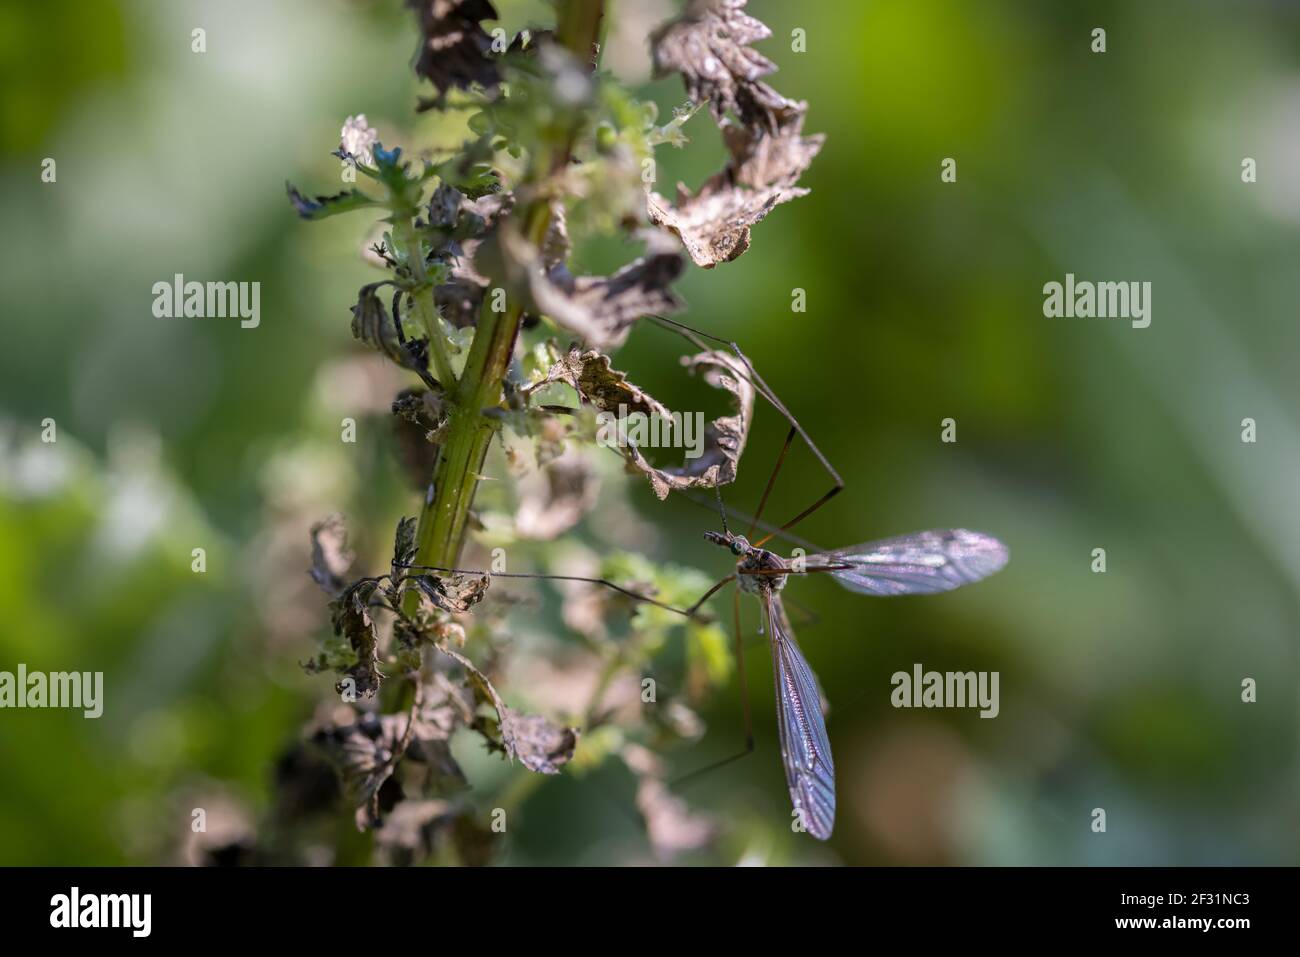 Crane fly is a common name referring to any member of the insect family Tipulidae. Stock Photo